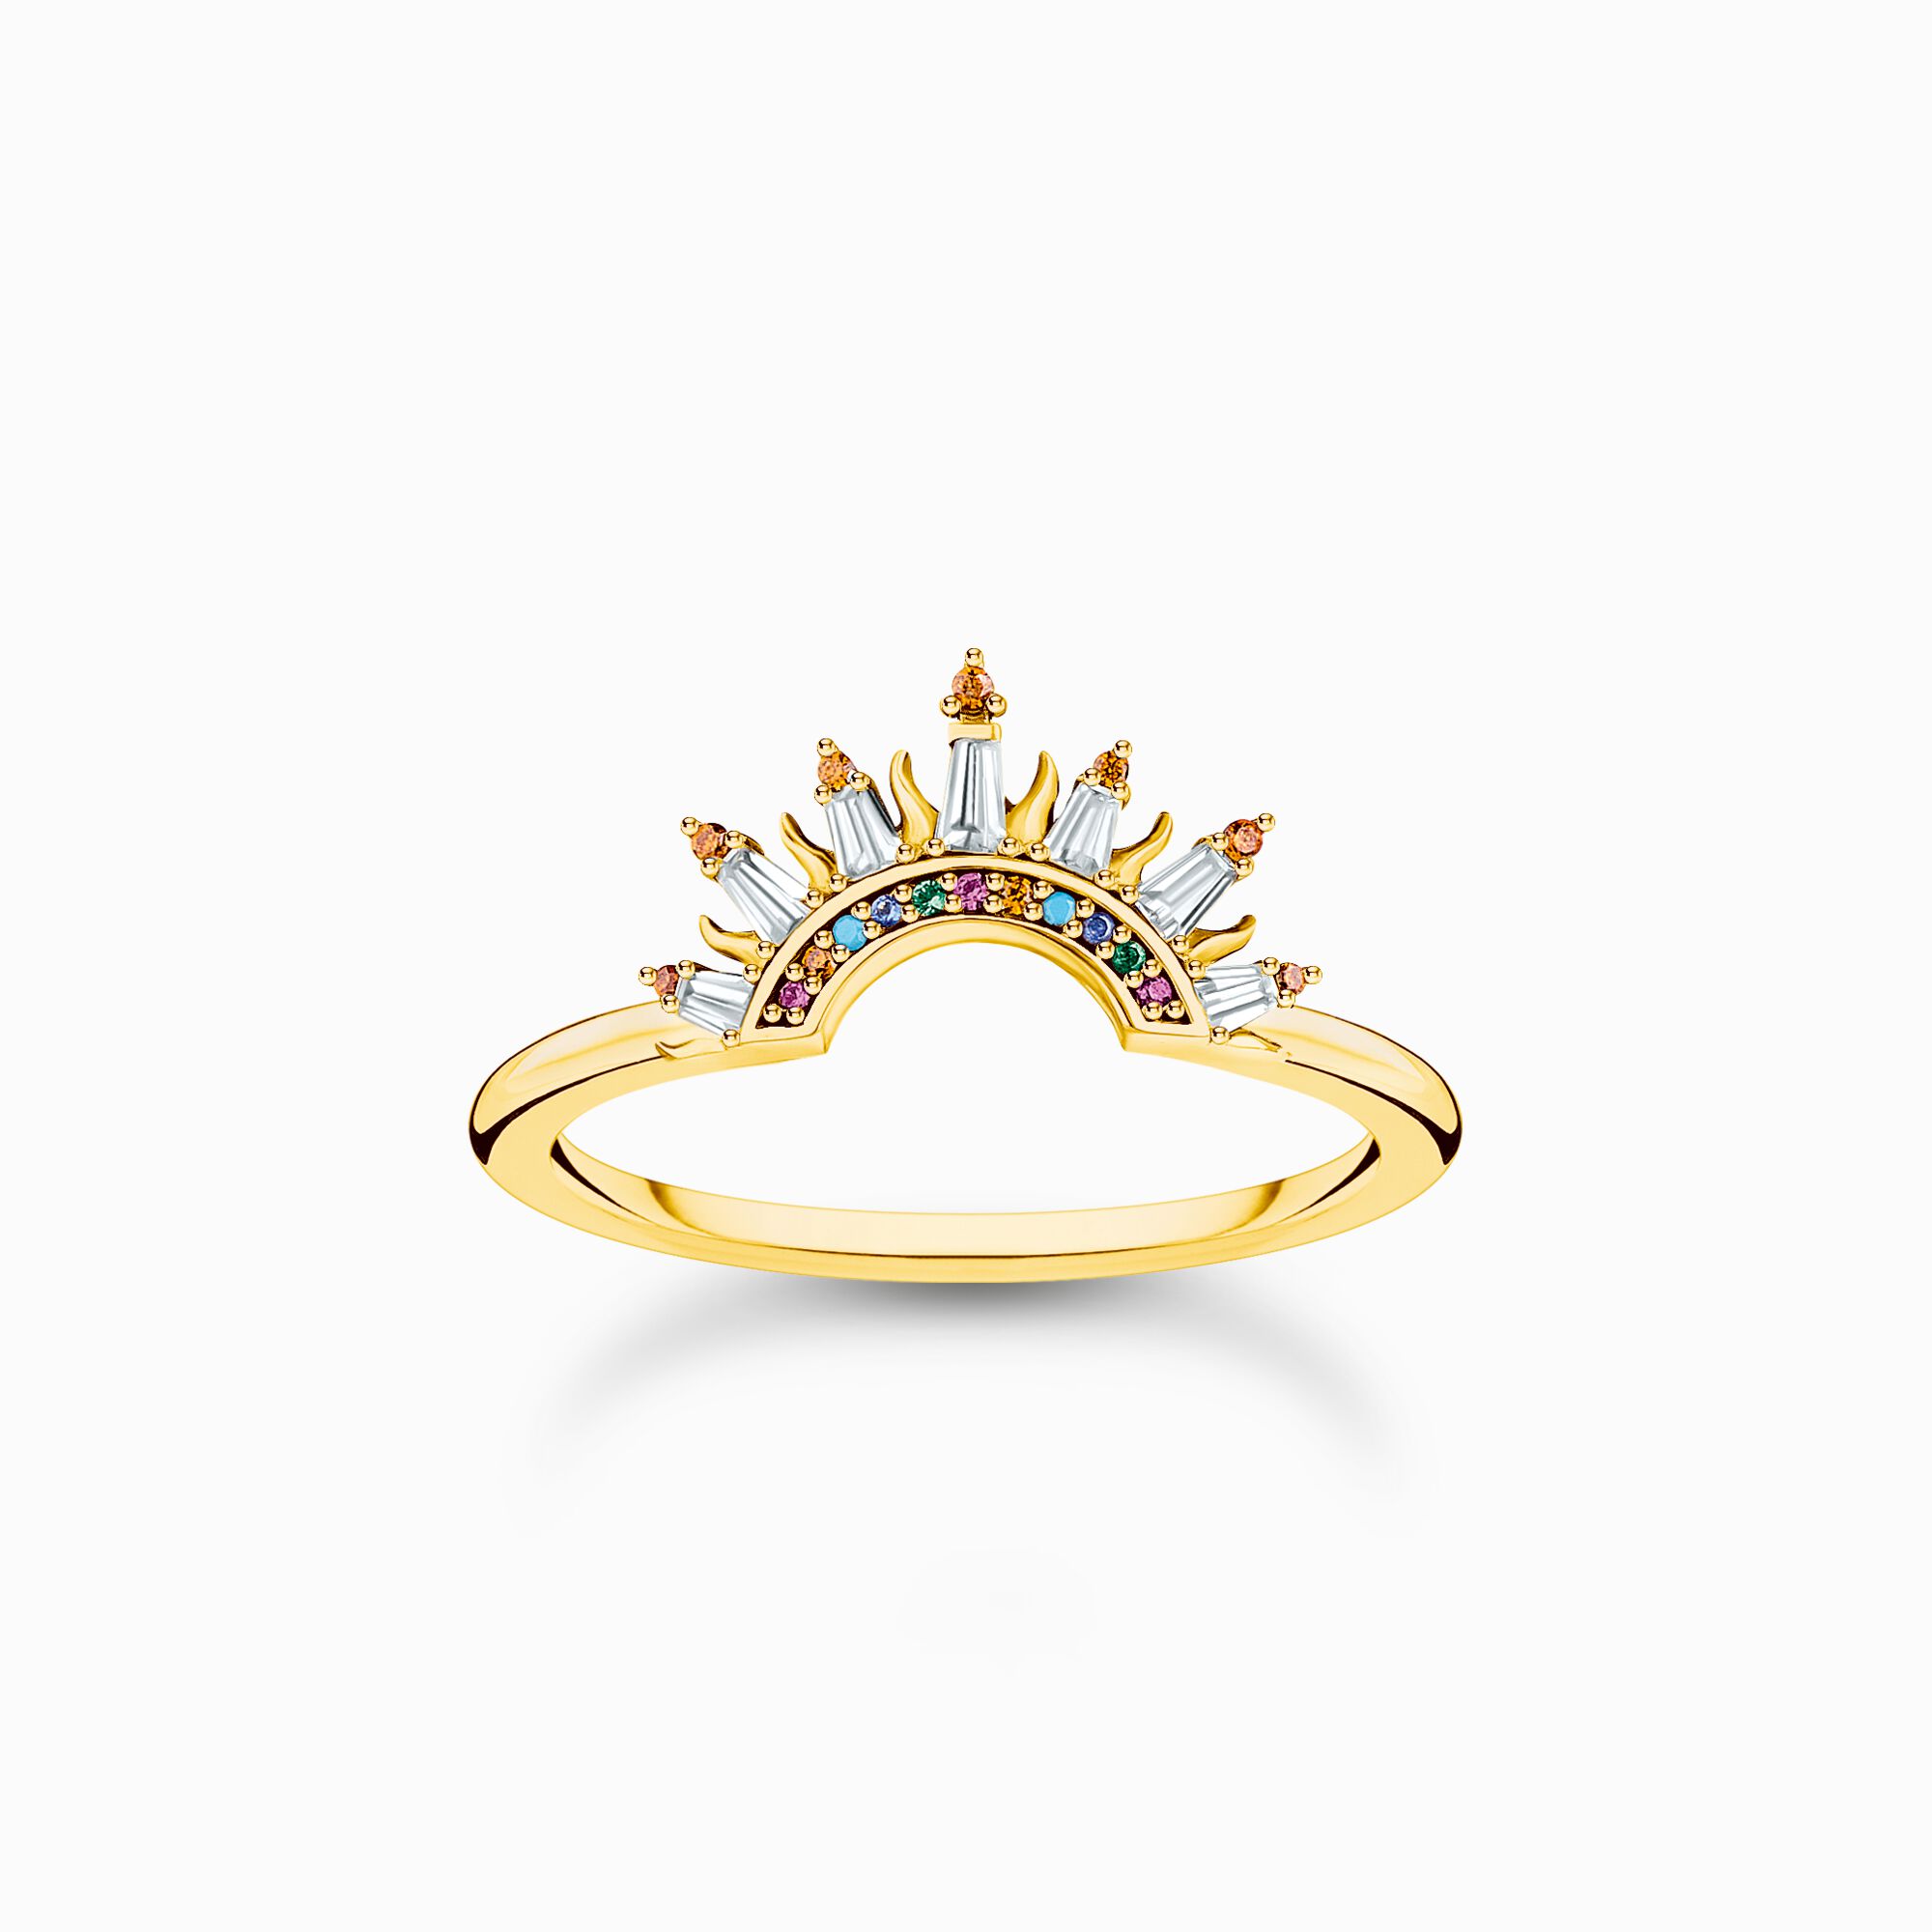 Gold-plated ring with sun beams and colourful stones from the Charming Collection collection in the THOMAS SABO online store